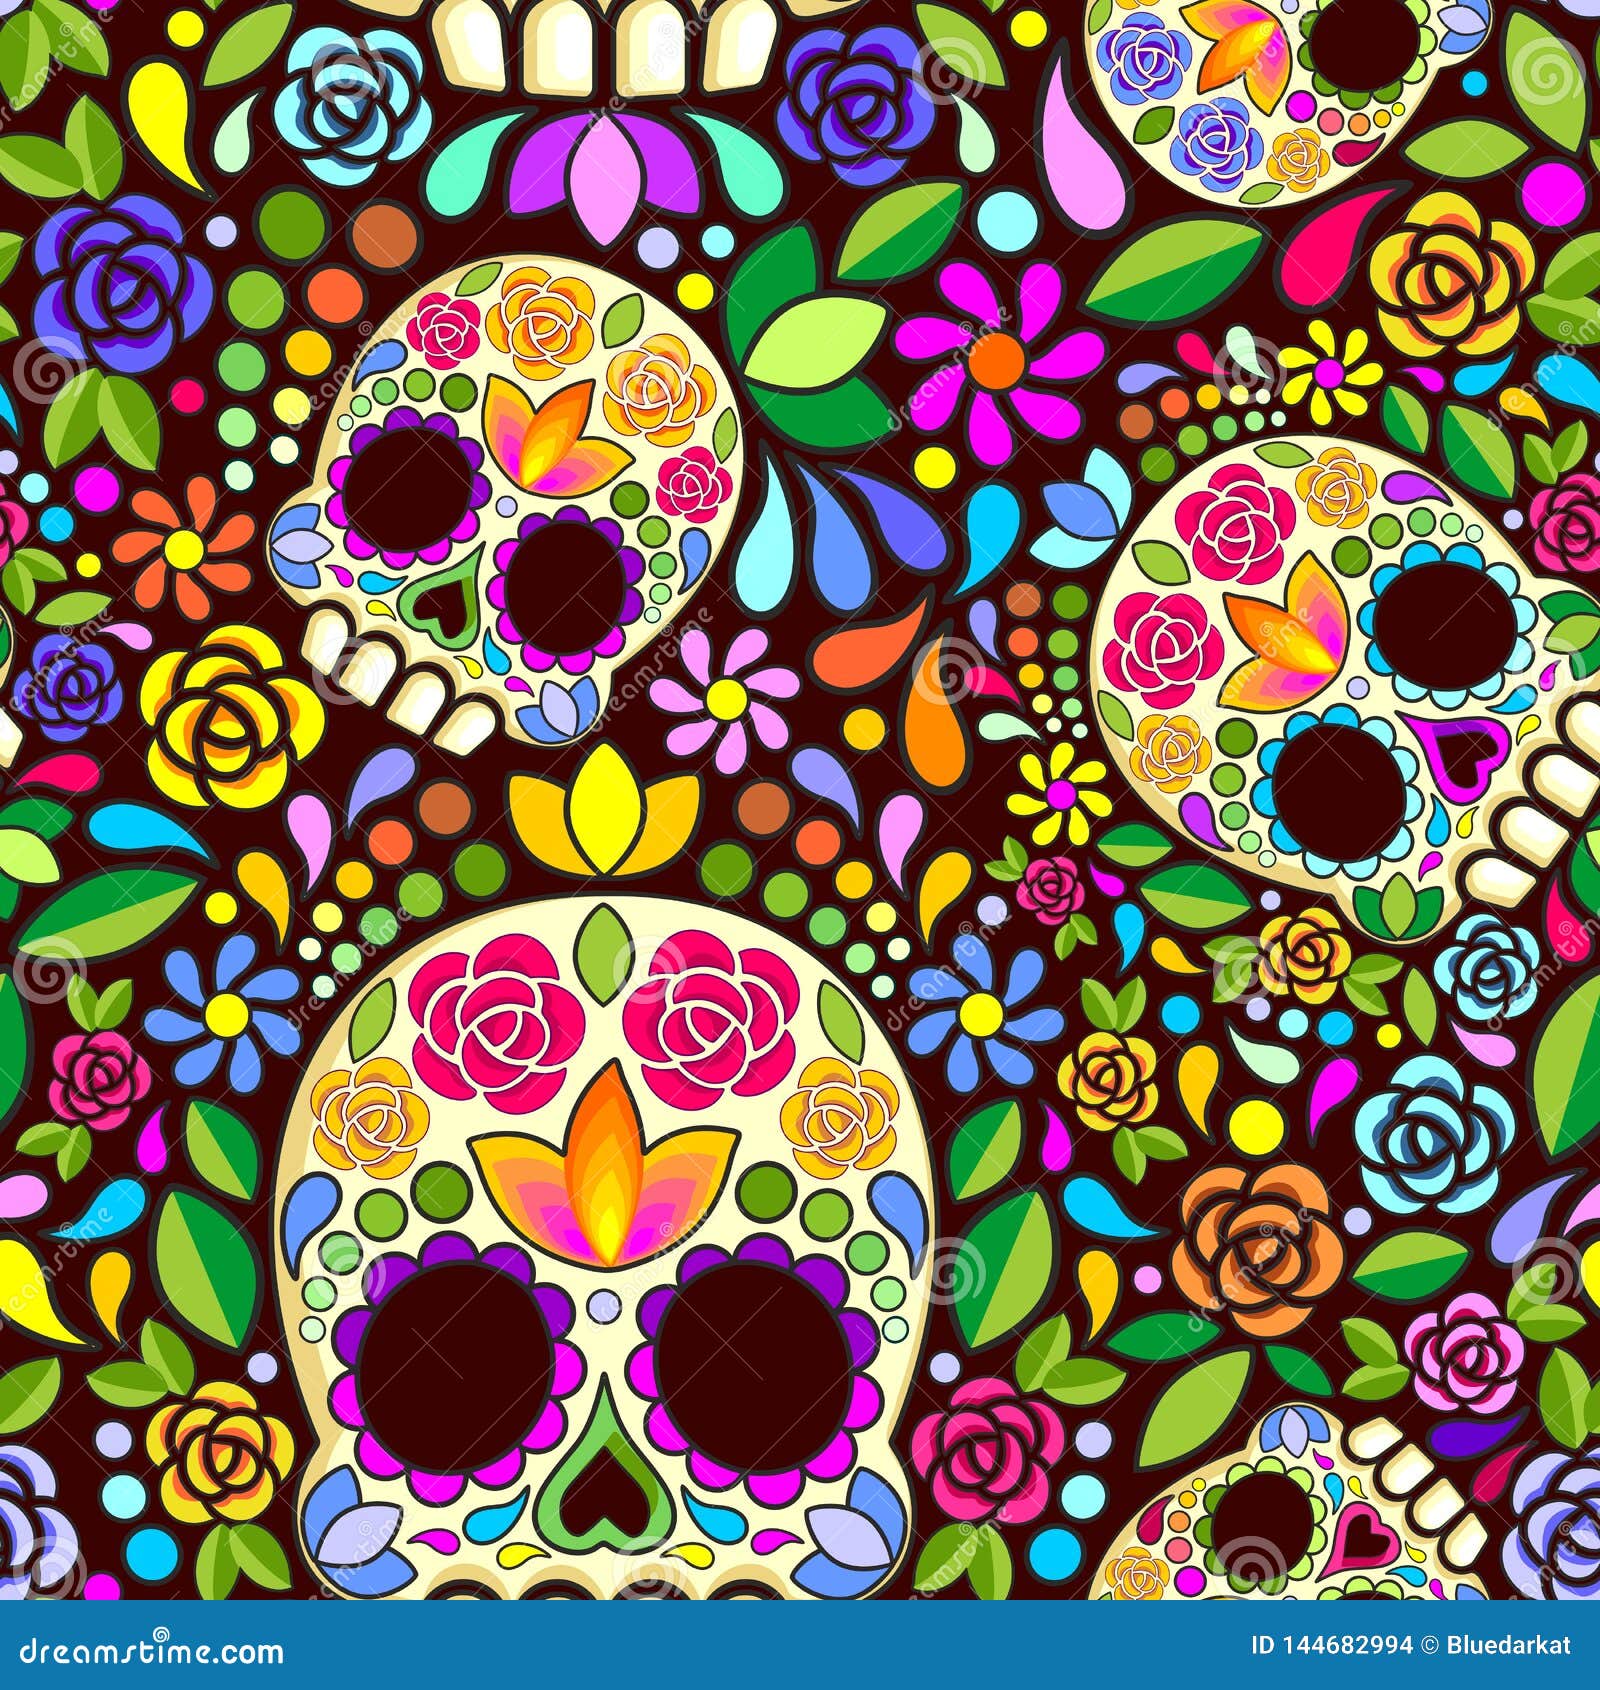 Sugar Skull 7x5 FT Vinyl Photography Background Backdrops,Pattern With Skulls and Red Roses in Floral Mexican Style Ornaments Print Background for Graduation Prom Dance Decor Photo Booth Studio Prop B